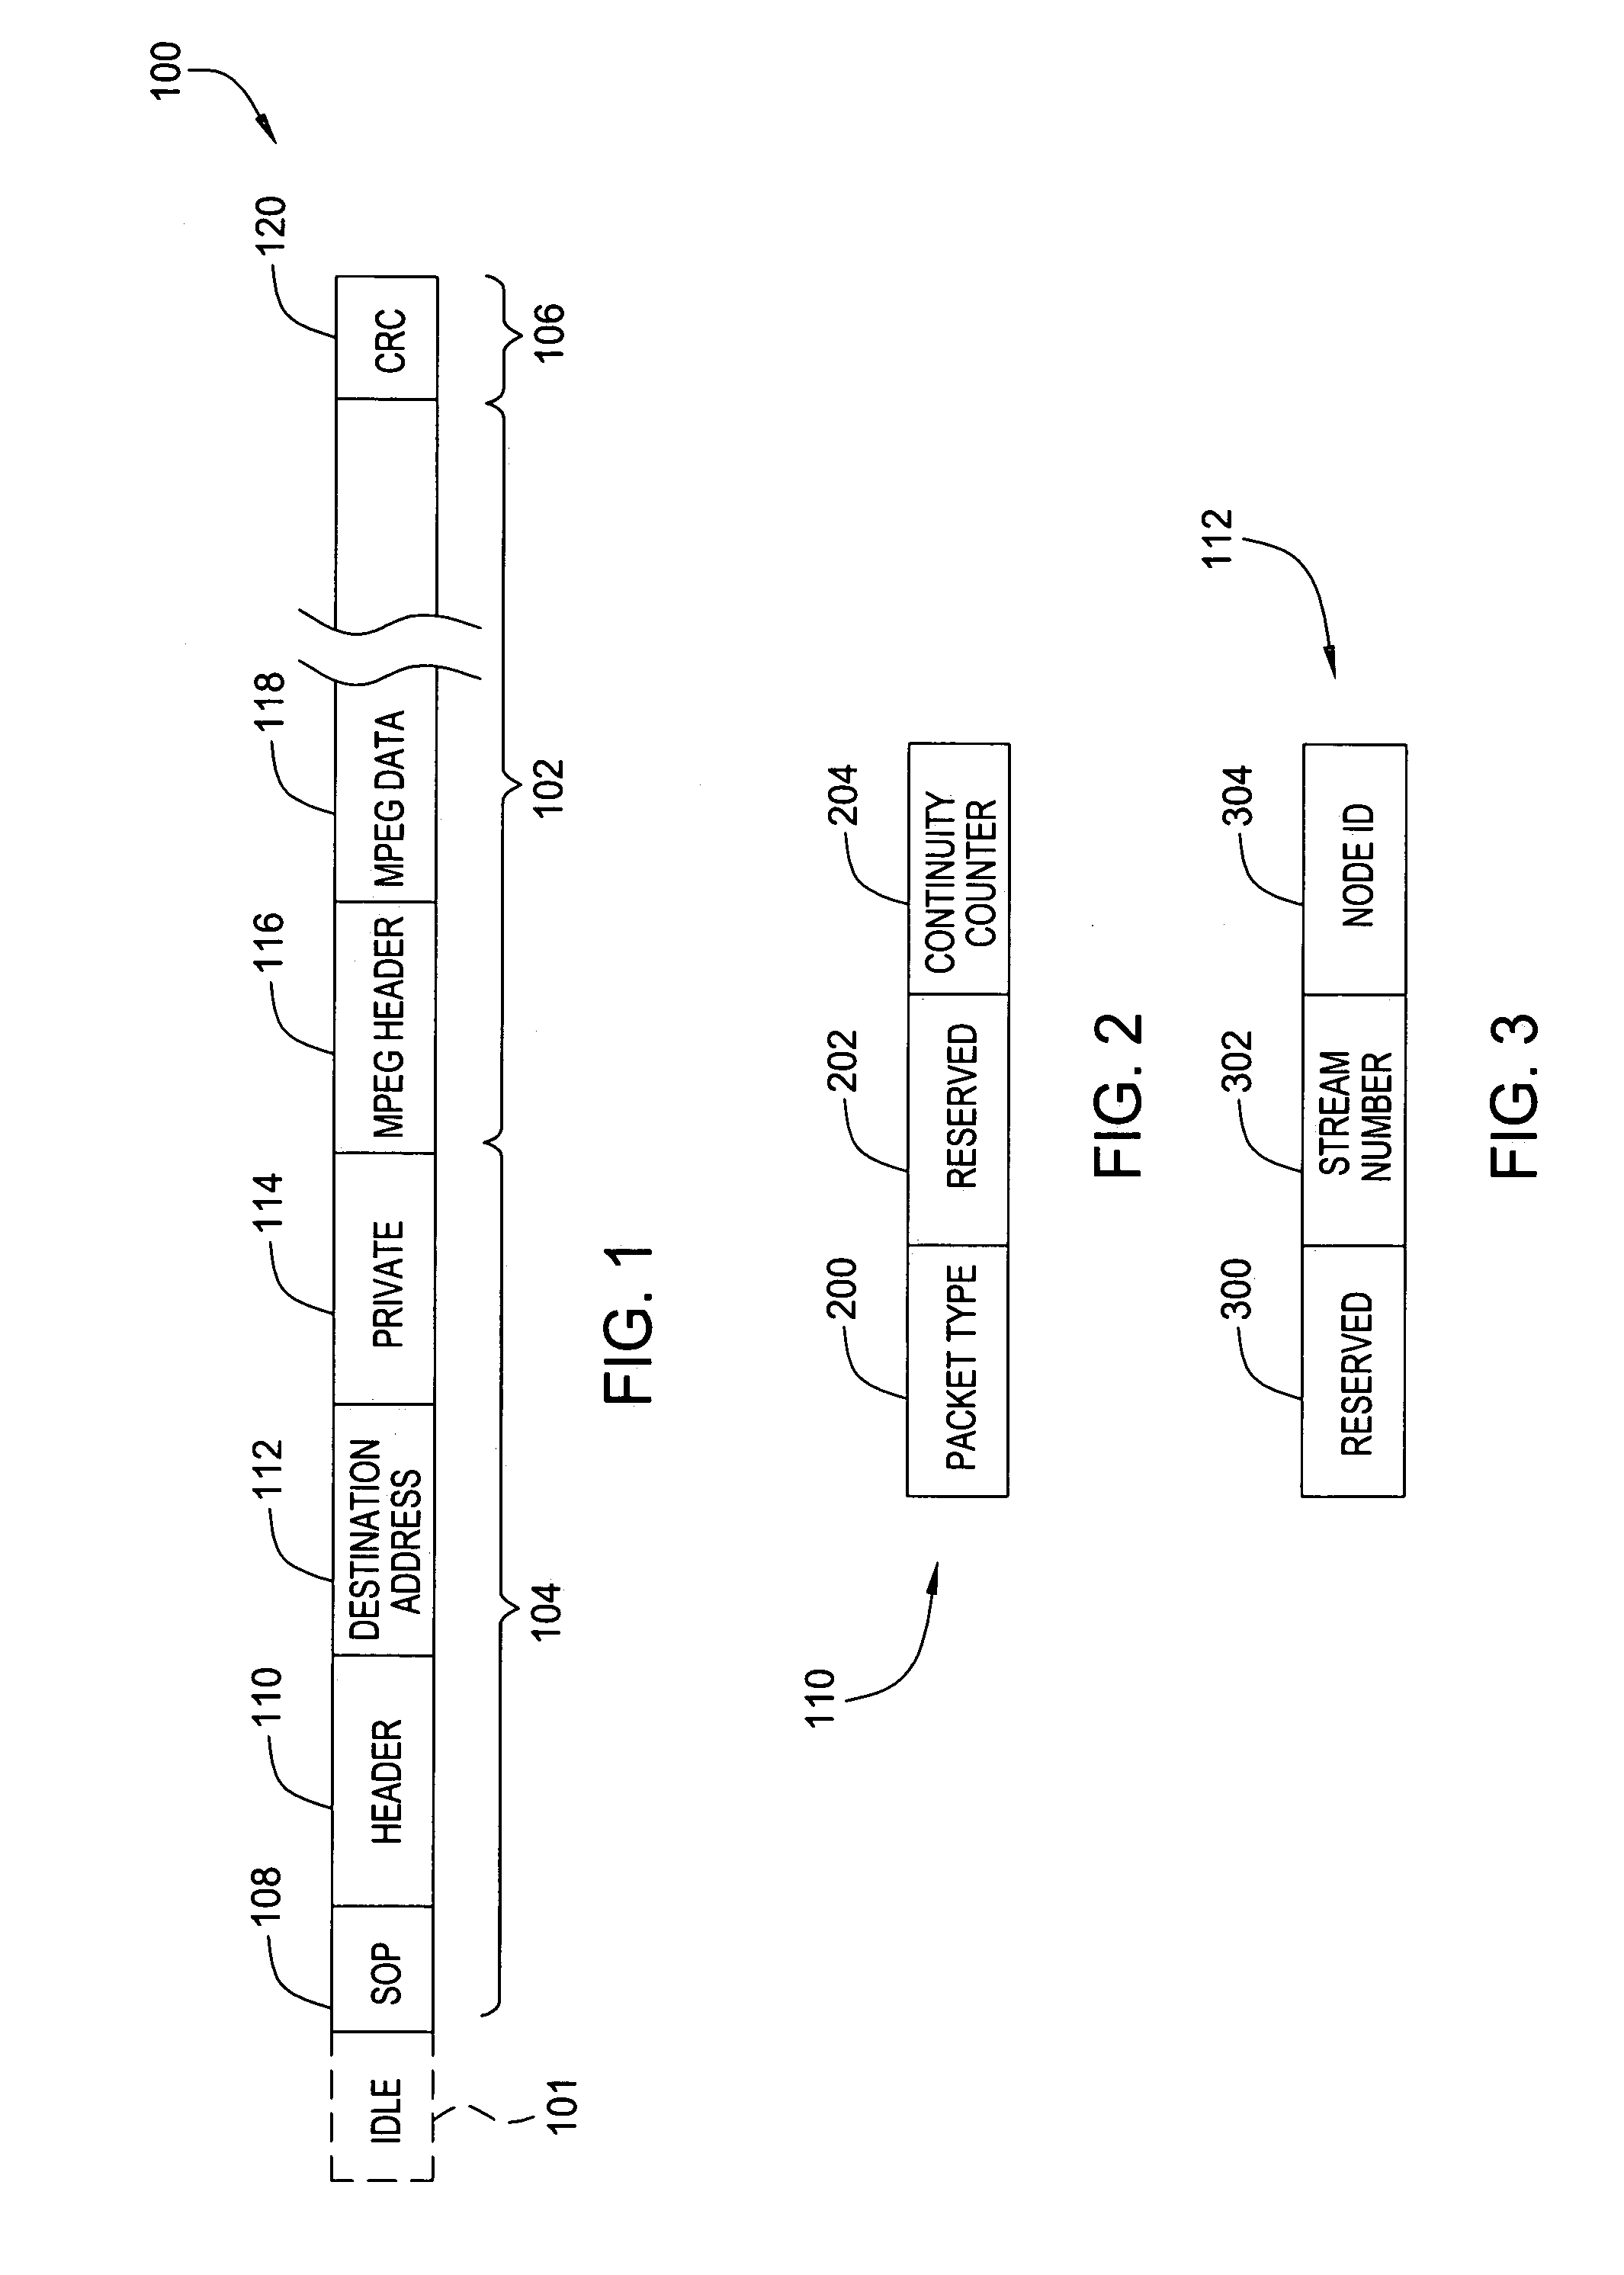 Asynchronous serial interface (ASI) ring network for digital information distribution